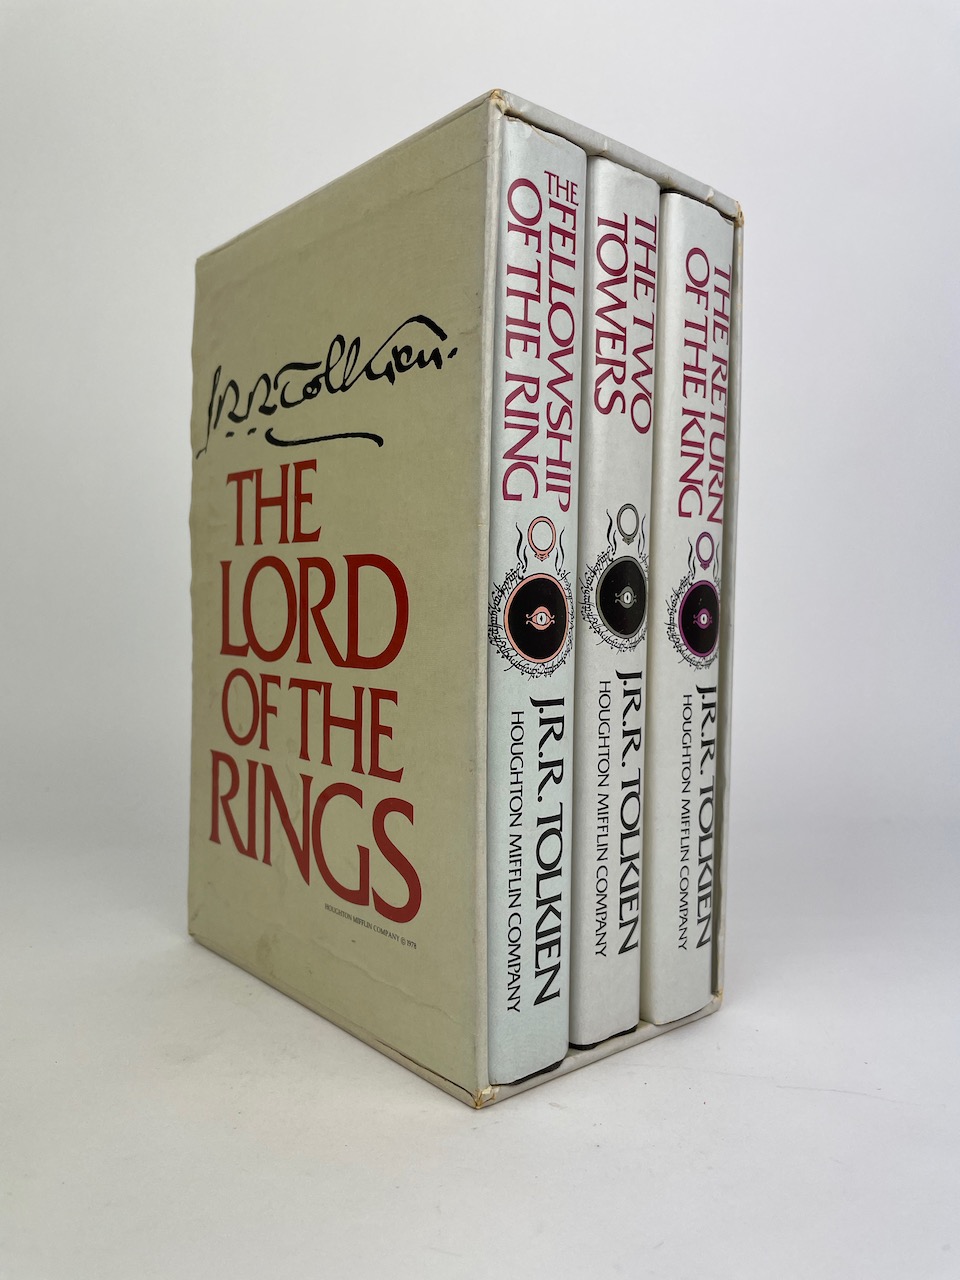 The Lord of the Rings JRR Tolkien Signature set from 1978, by Houghton Mifflin 1